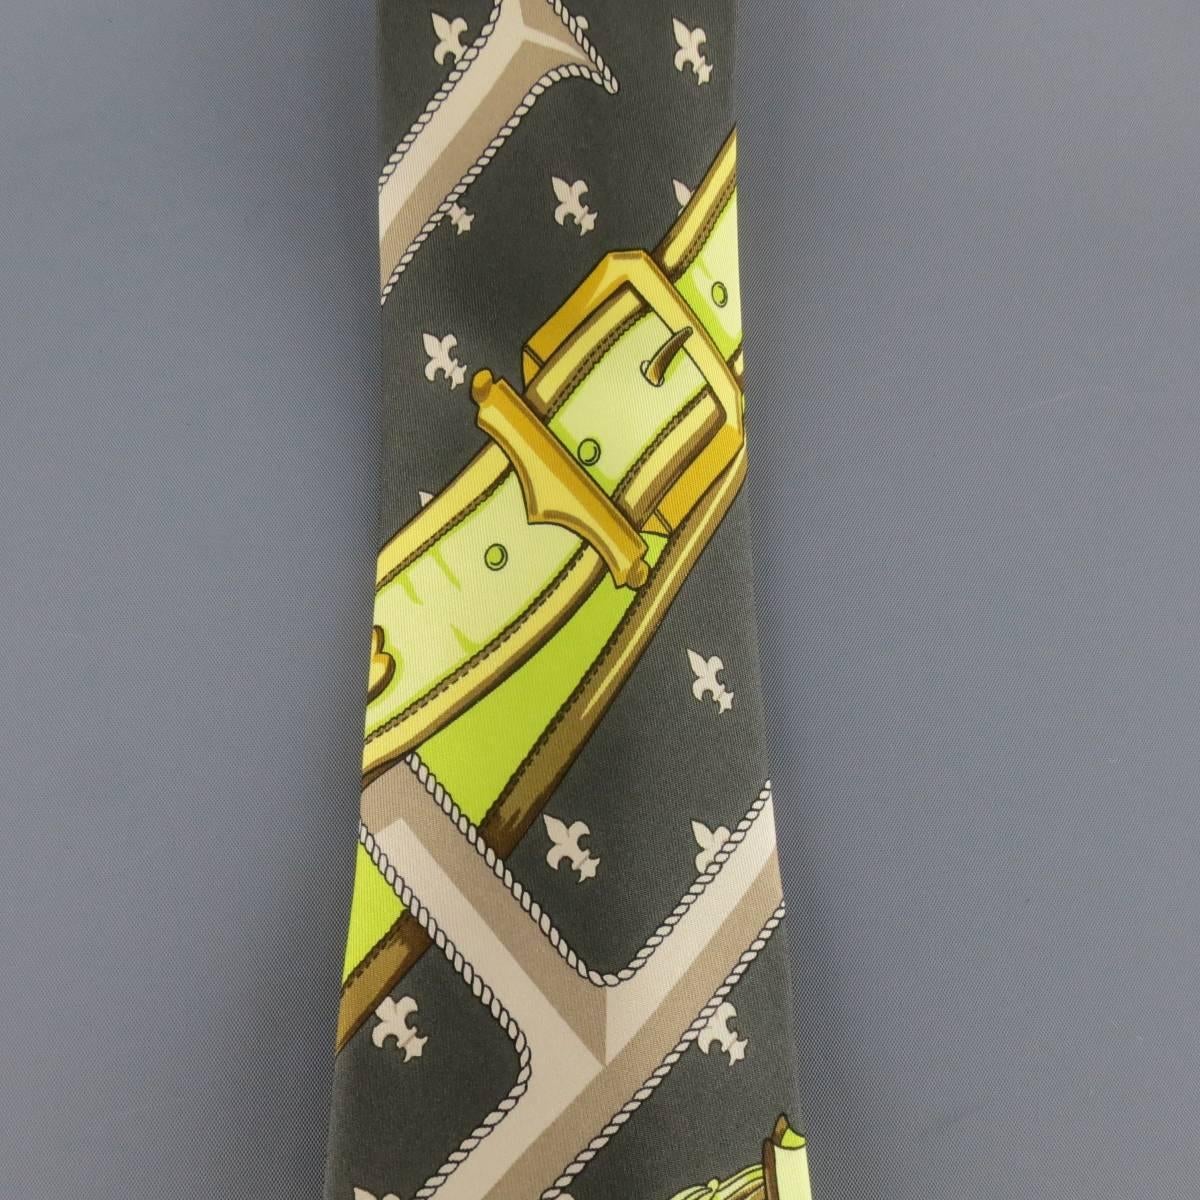 Vintage HERMES tie in a fleur de lis charcoal gray silk twill featuring a scarf print with oversized H's, and lime green and gold brocade and belt panels. Small stains on side. Made in France.
 
Fair Pre-Owned Condition.
 
Width: 4 in.